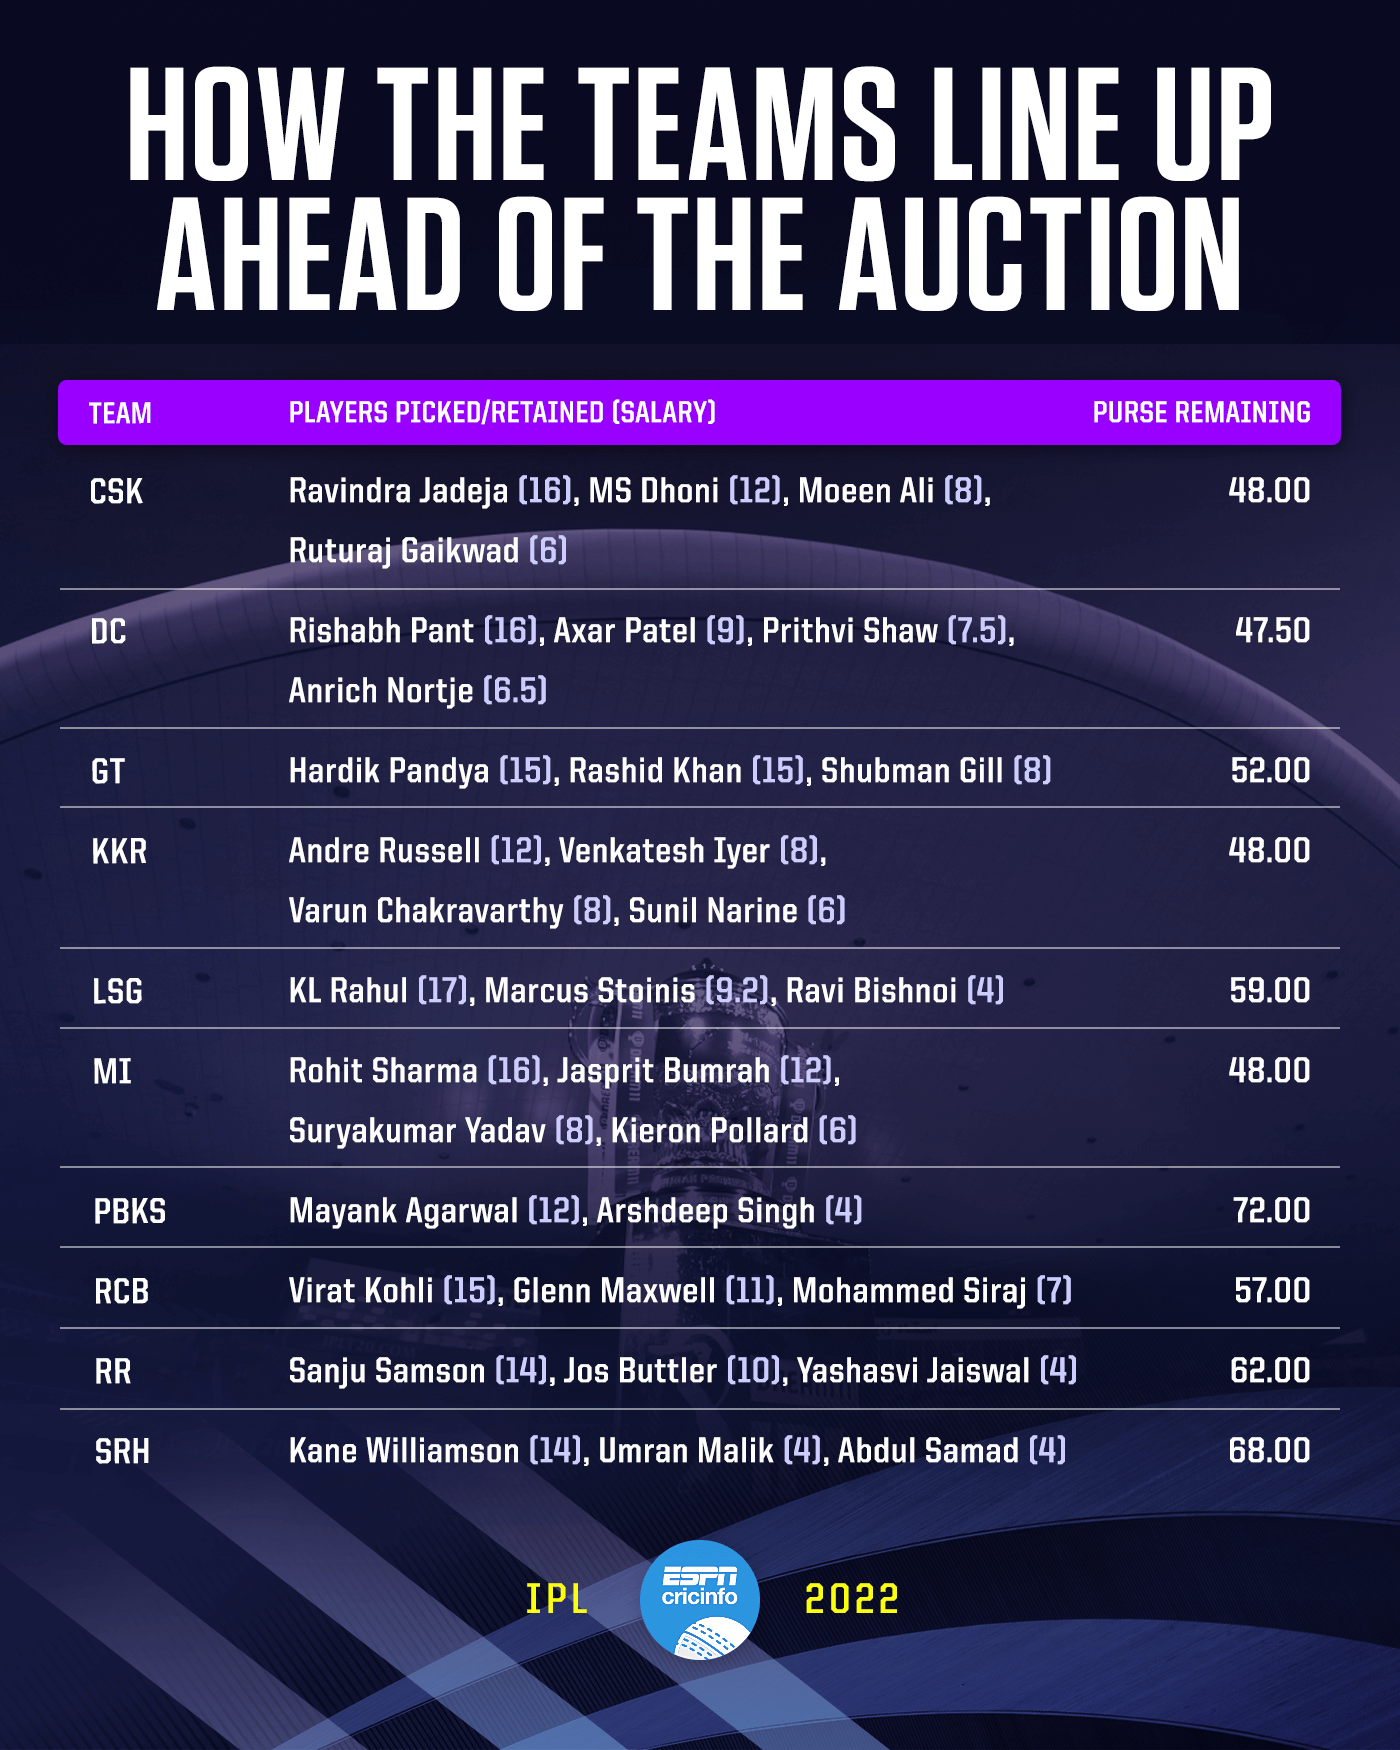 Ipl Schedule 2022 Faqs - All You Wanted To Know About The Ipl 2022 Auction